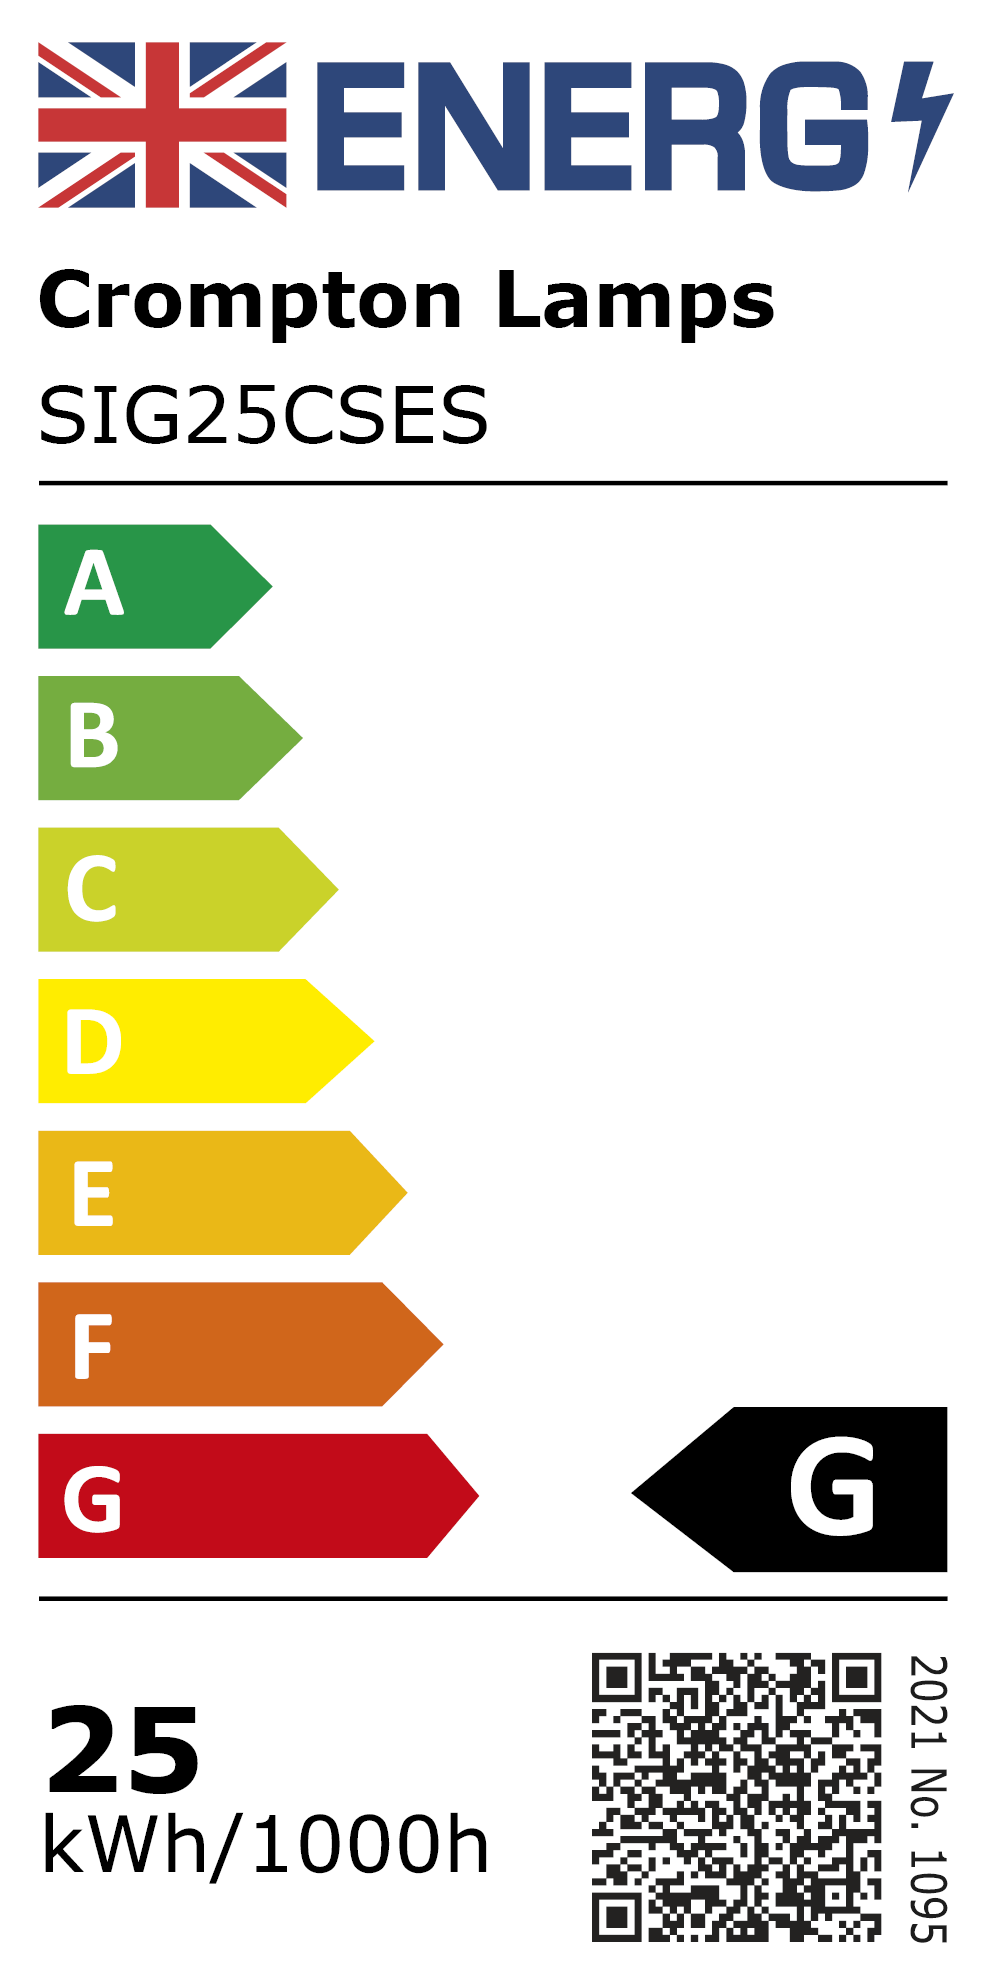 New 2021 Energy Rating Label: Stock Code SIG25CSES